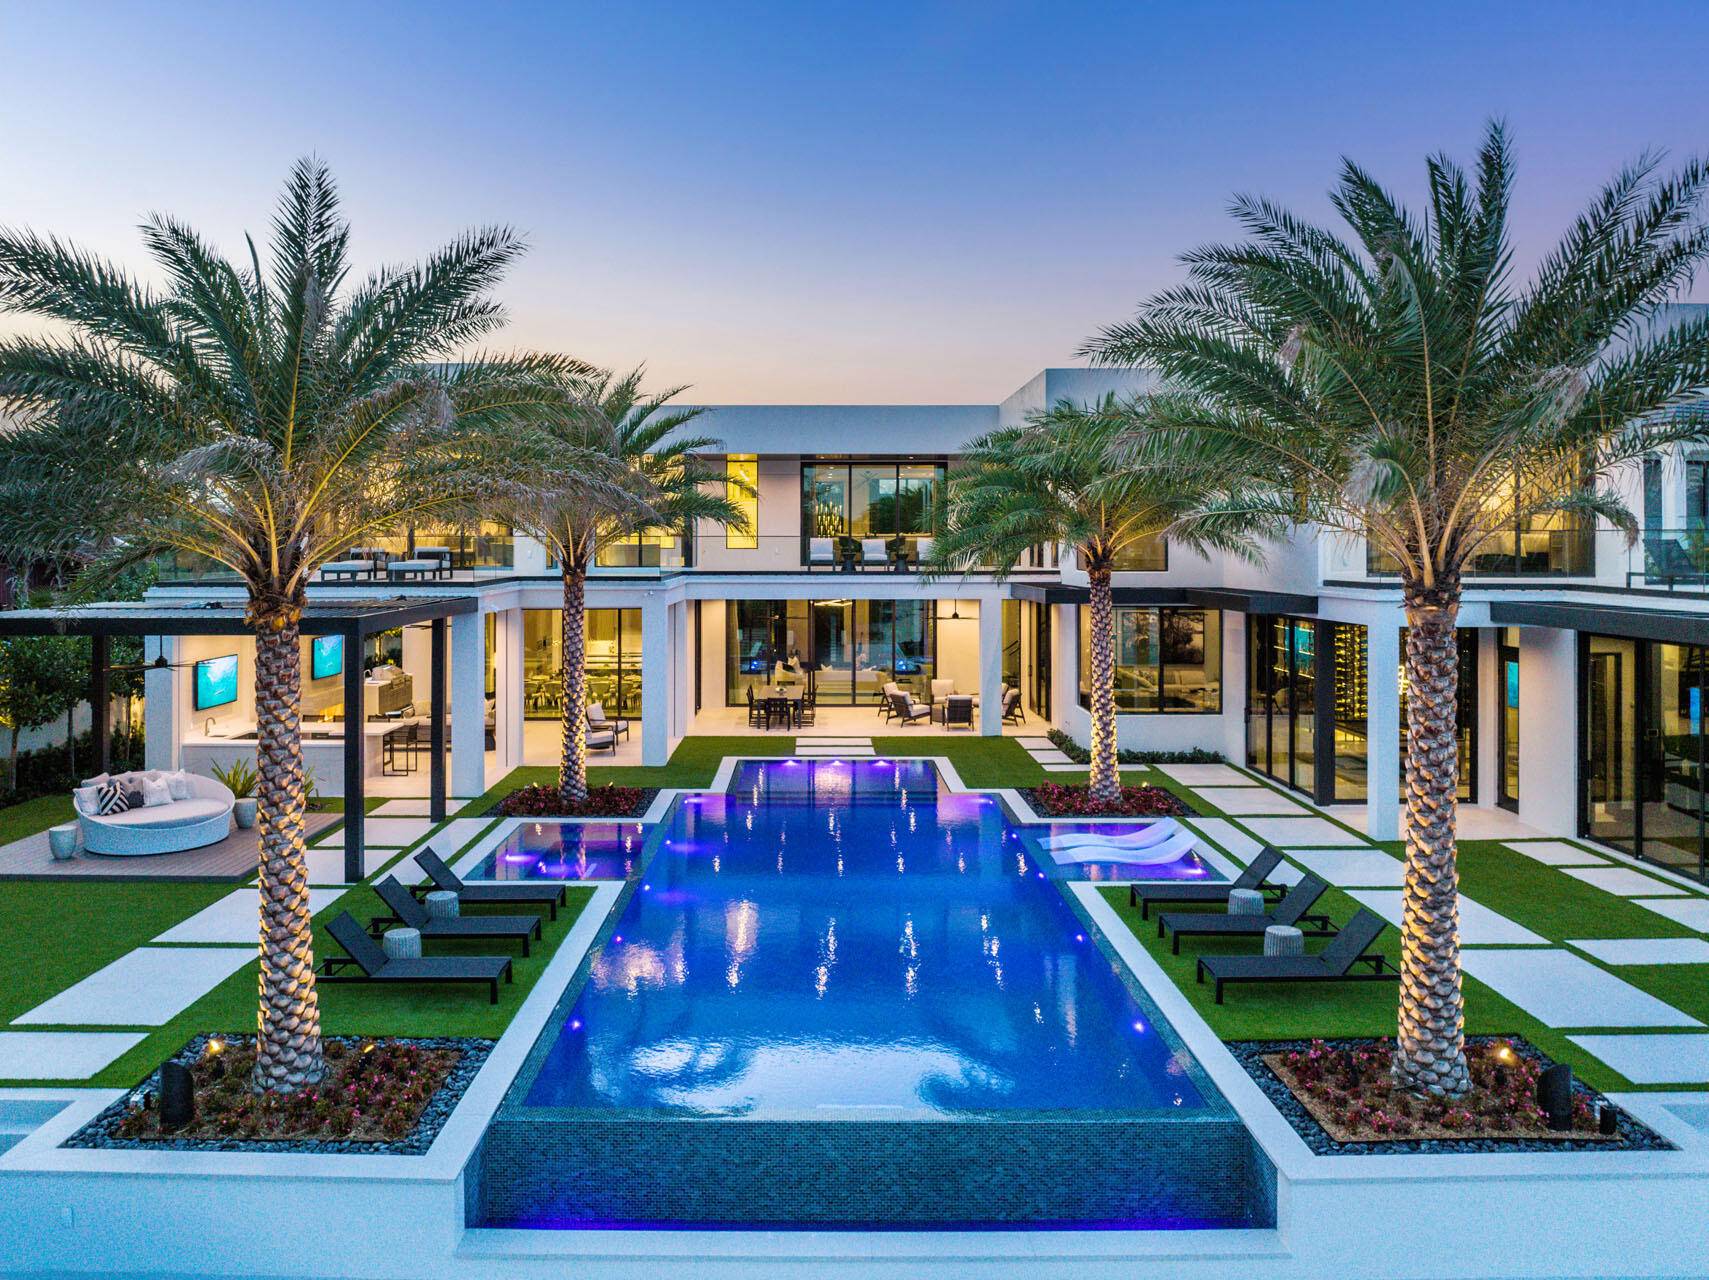 Introducing an exquisite Intracoastal Signature Estate by SRD Building Corp, nestled within Boca Raton's most prestigious community, the Royal Palm Yacht Country Club.